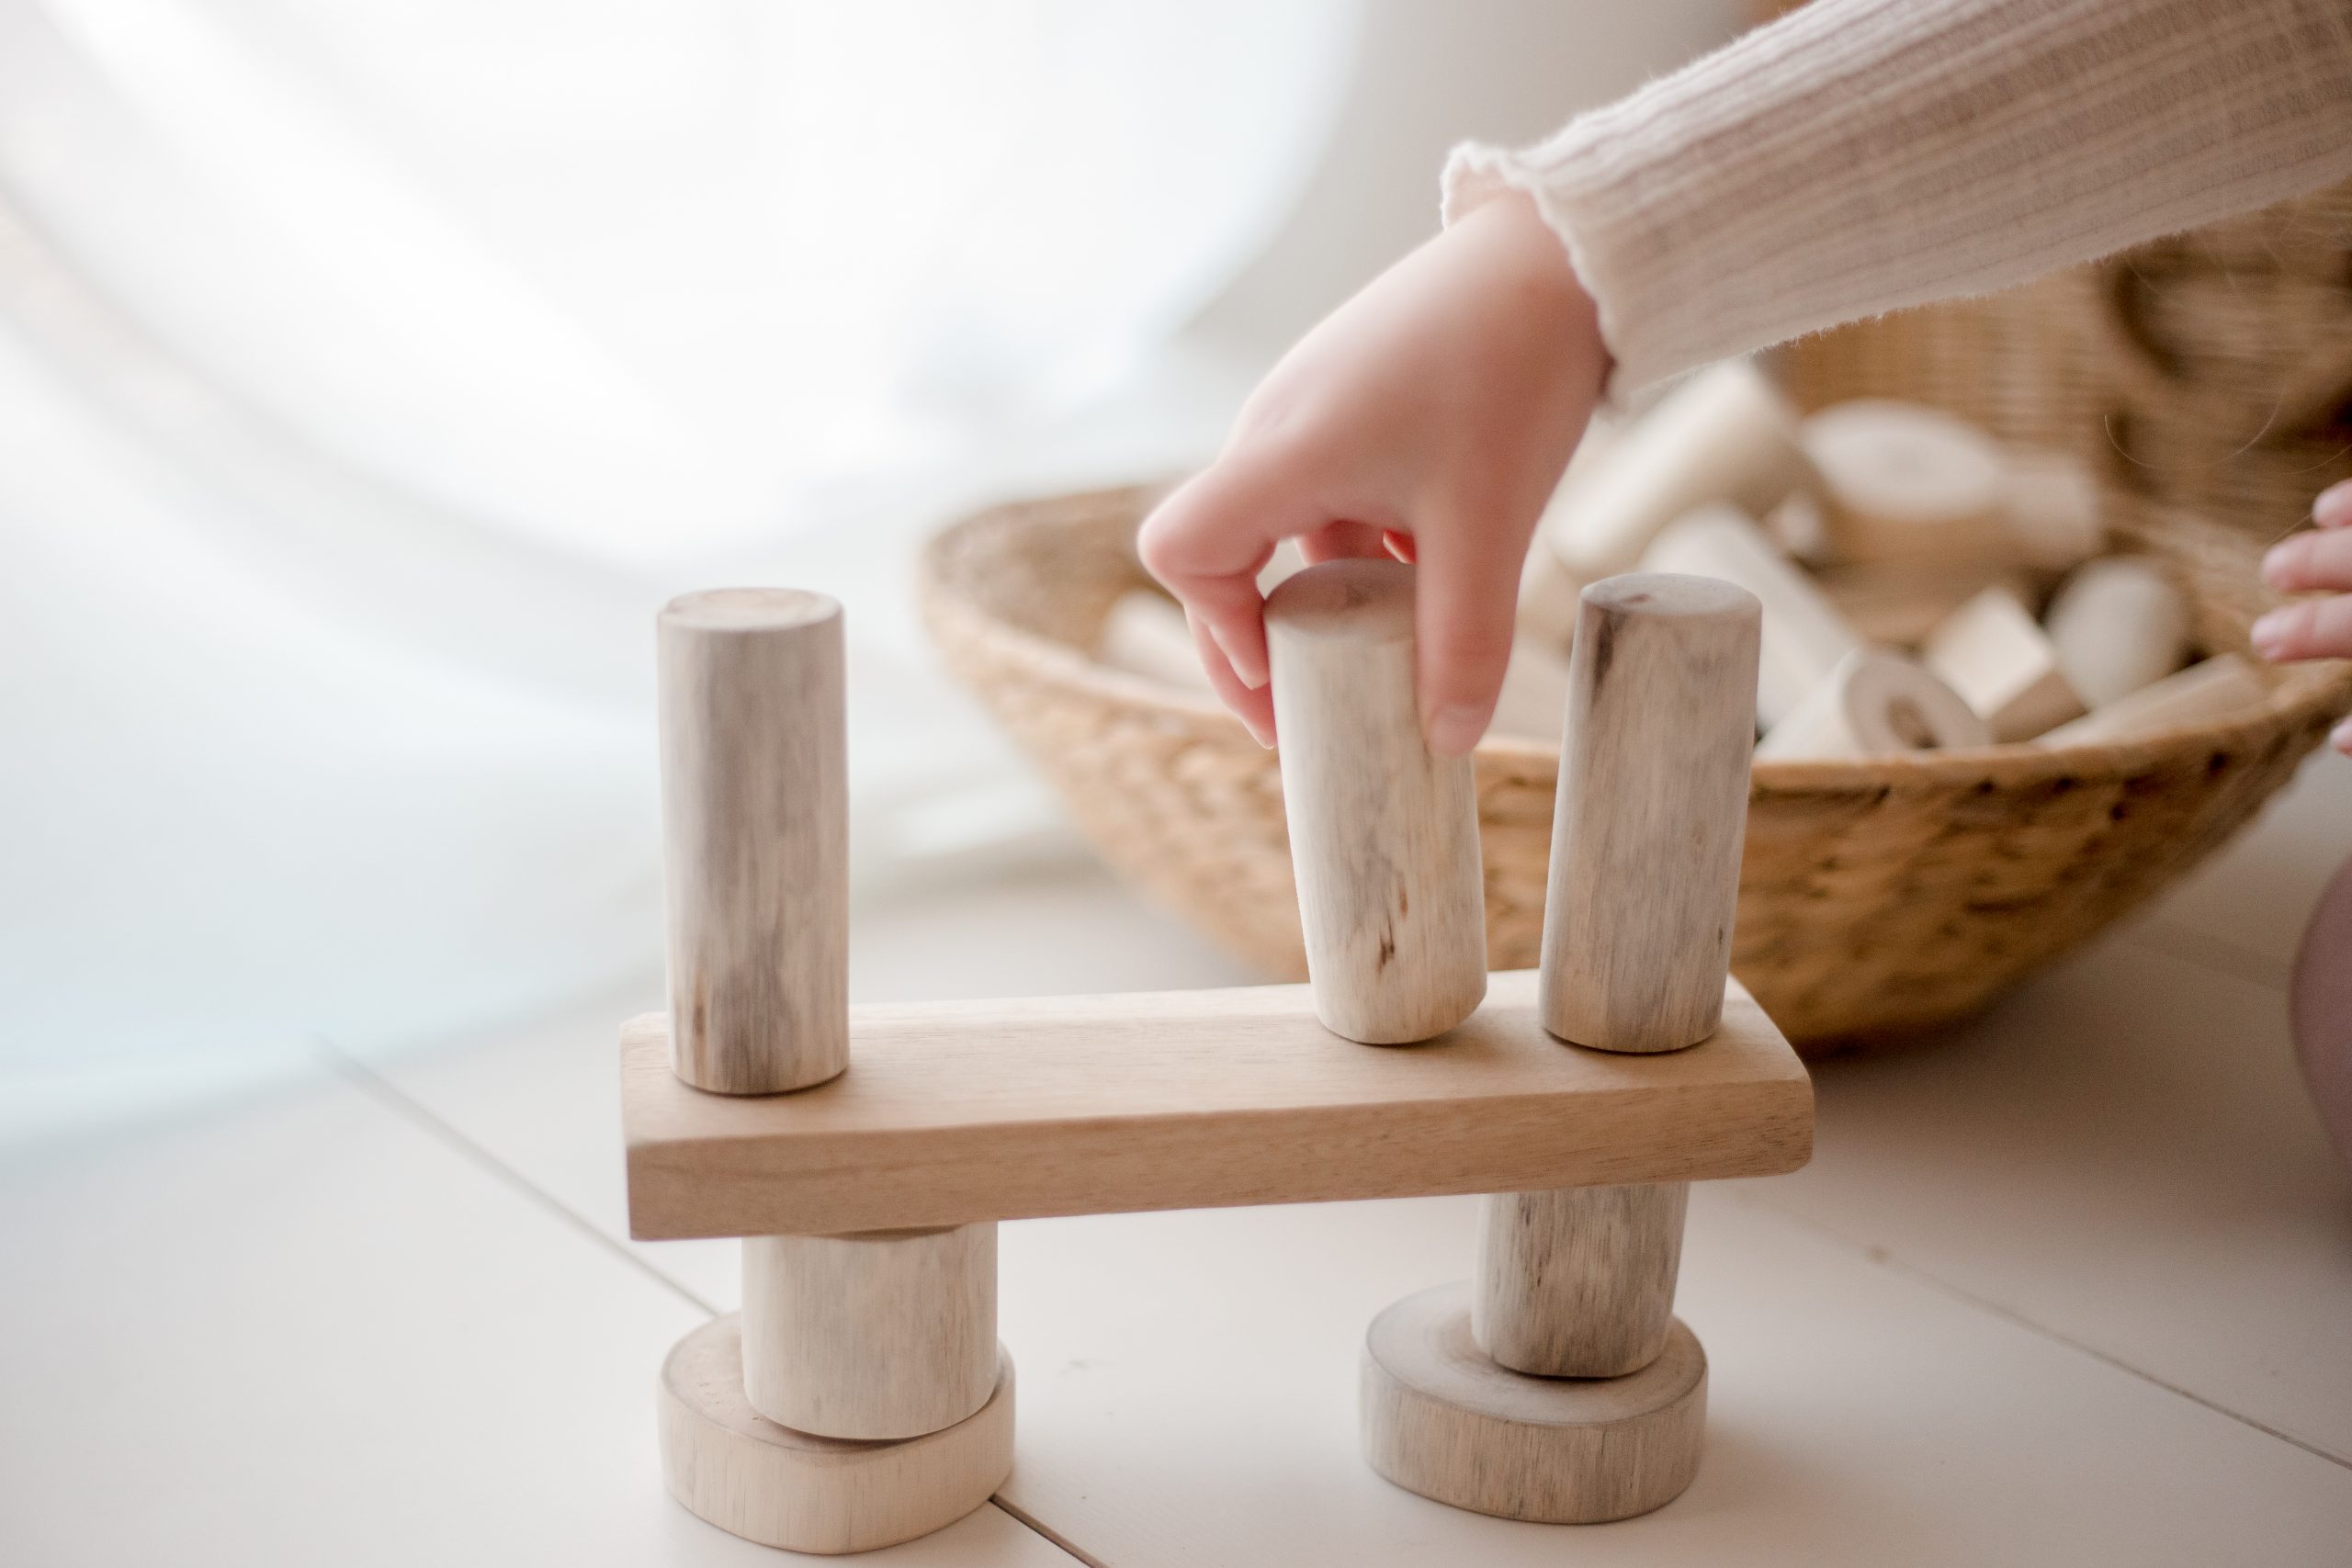 Constructive play: Building skills, not just things